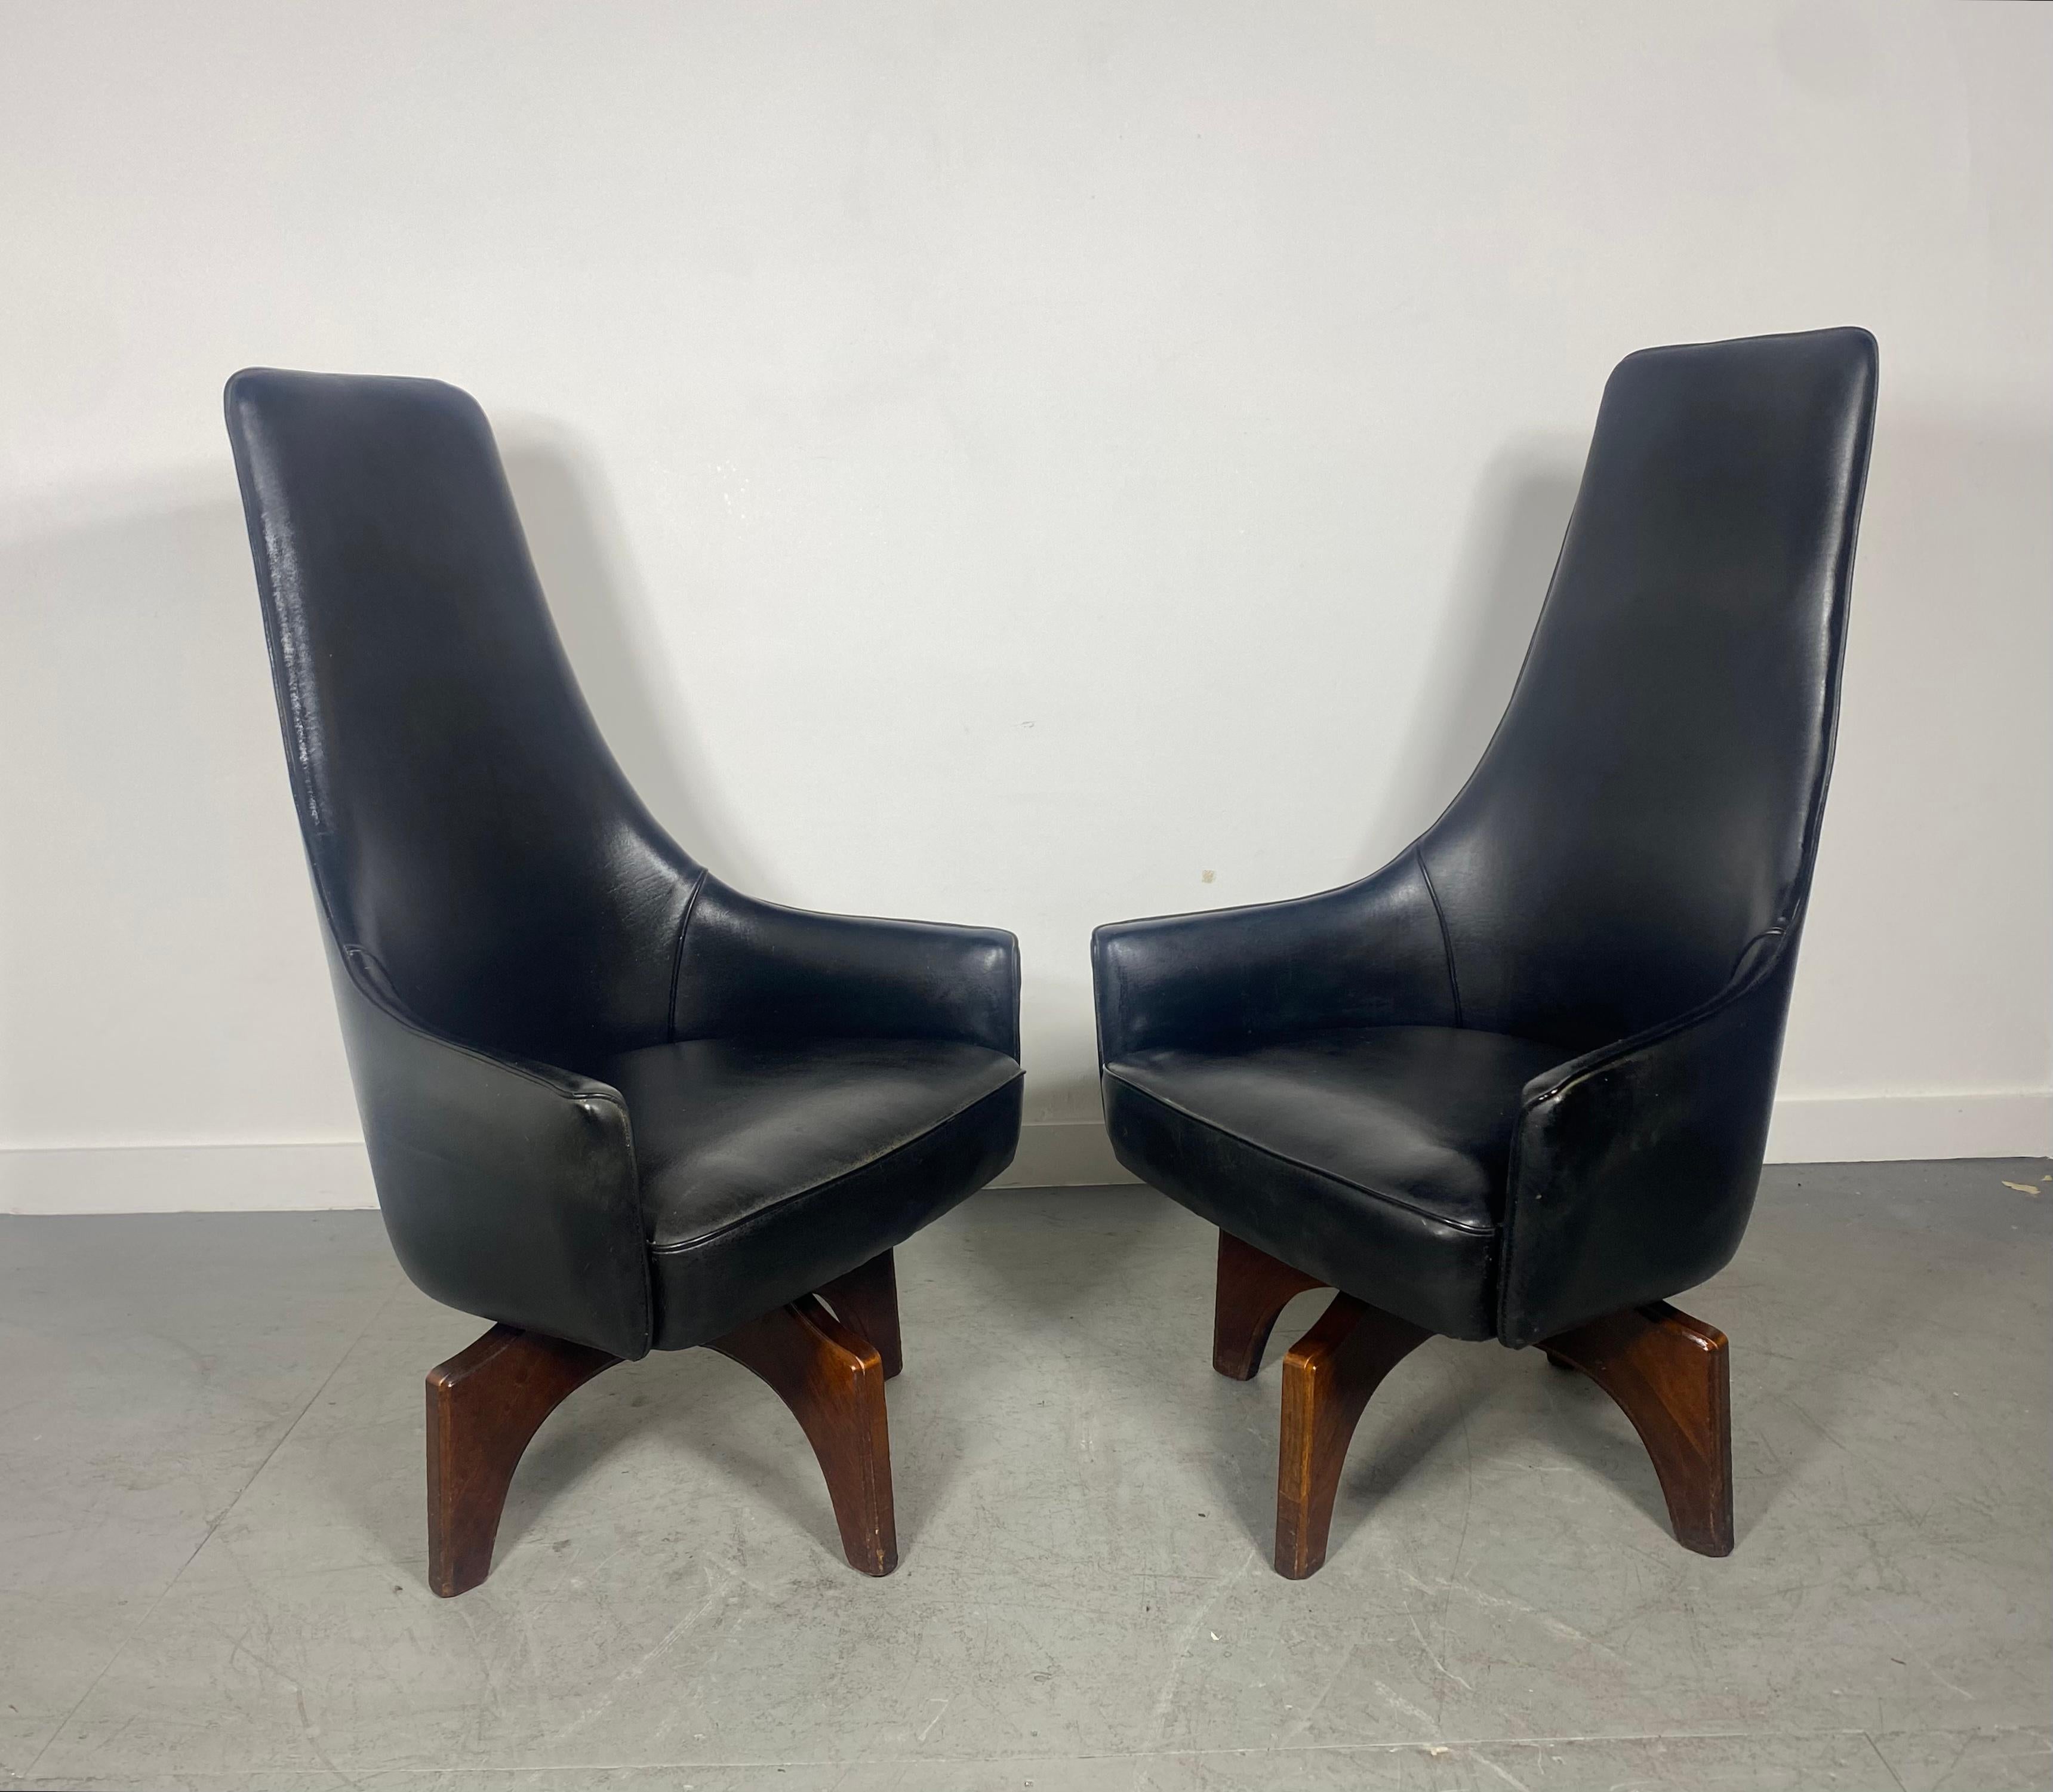 American Unusual High Back Swivel Arm Chairs by Virtue Bros..after Adrian Pearsall